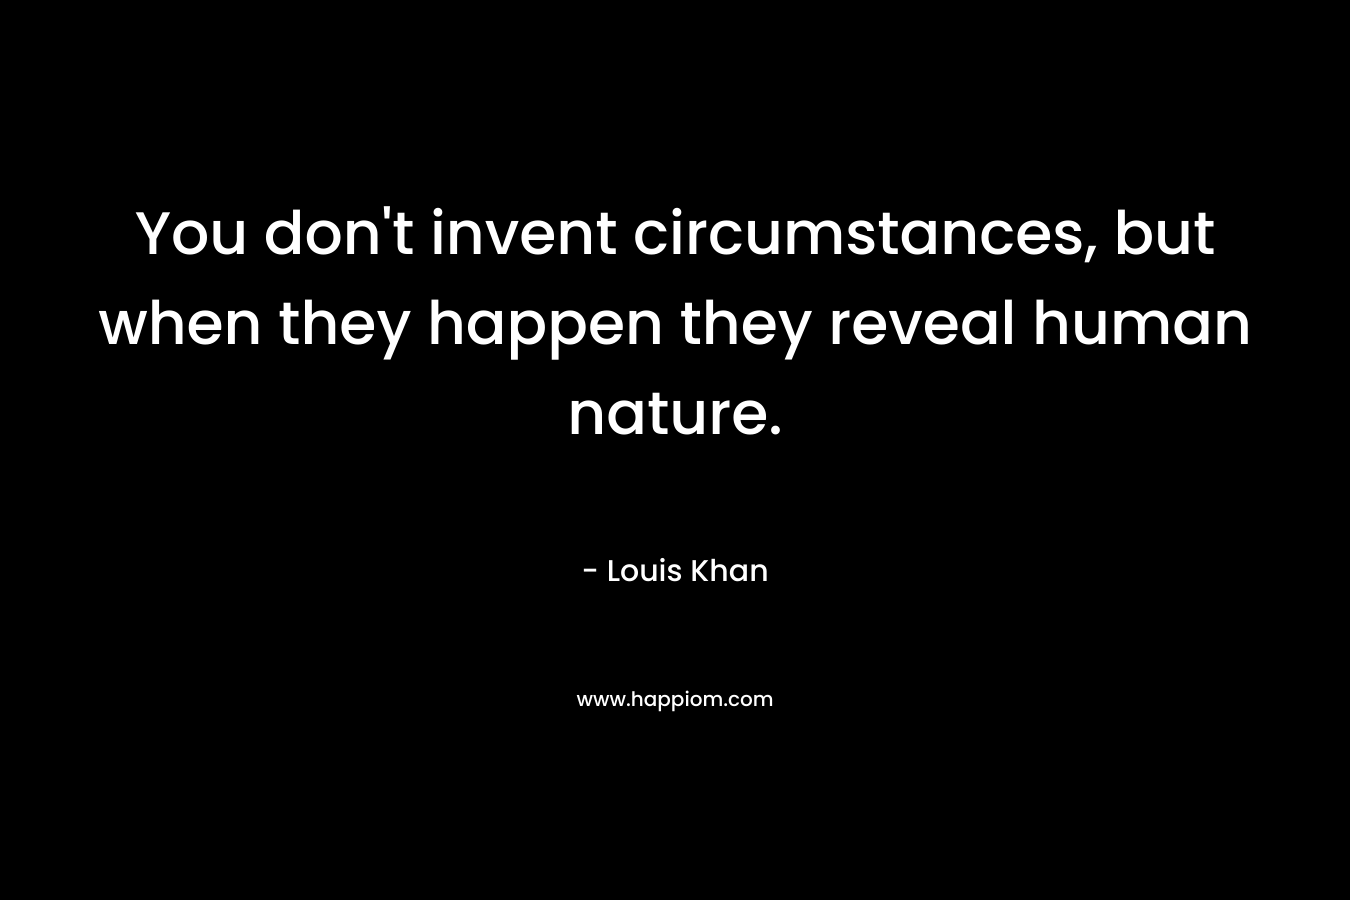 You don't invent circumstances, but when they happen they reveal human nature.